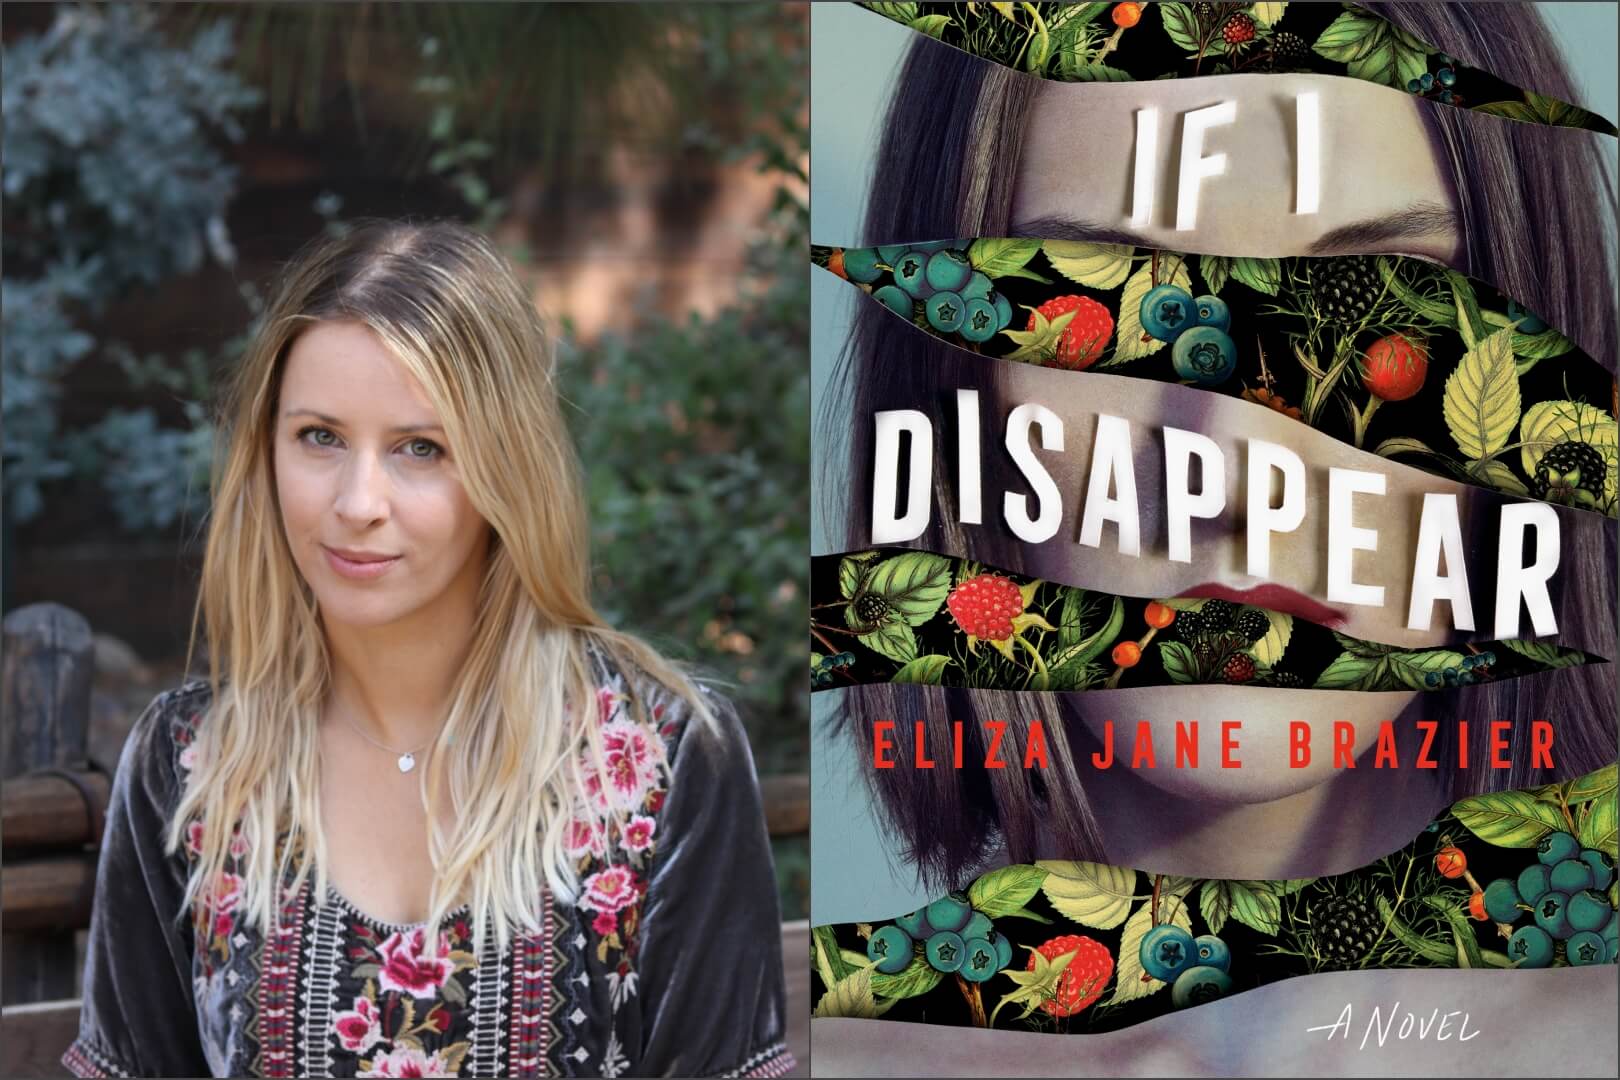 Q&A with Eliza Jane Brazier, Author of If I Disappear